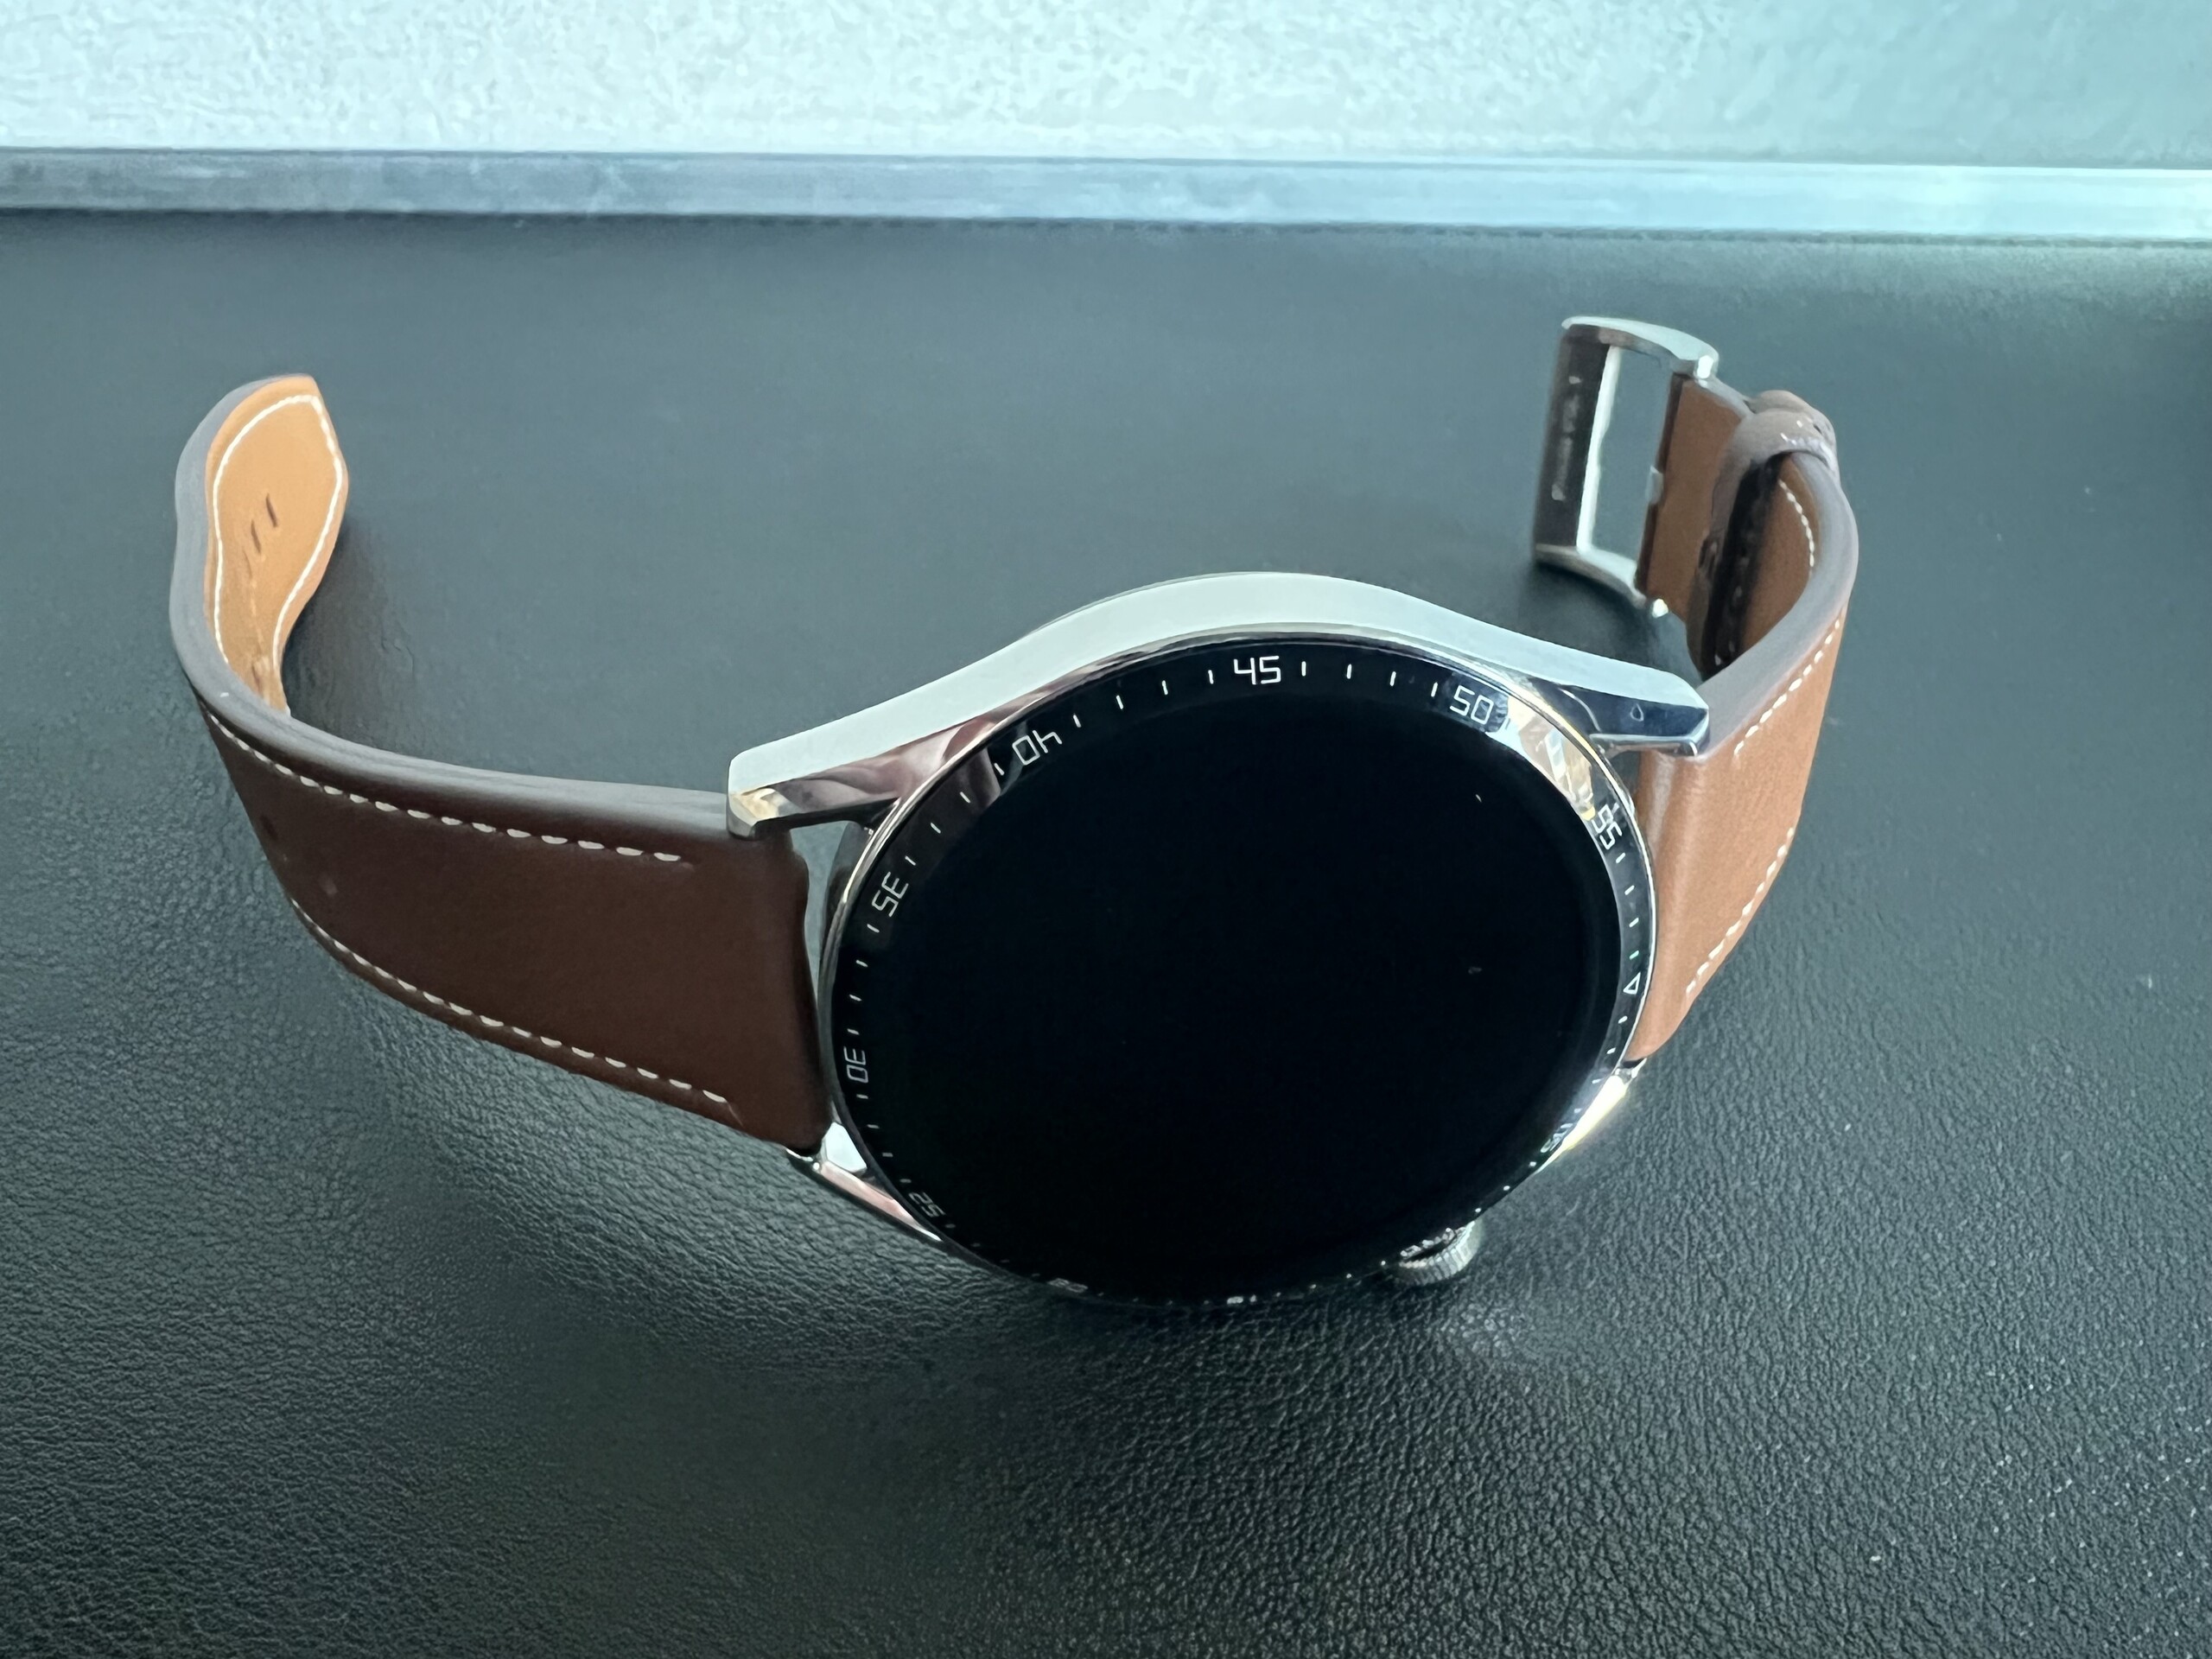 Array Knurre Countryside Huawei Watch GT 3 Smartwatch in Review: Classy looks and impressive battery  - NotebookCheck.net Reviews